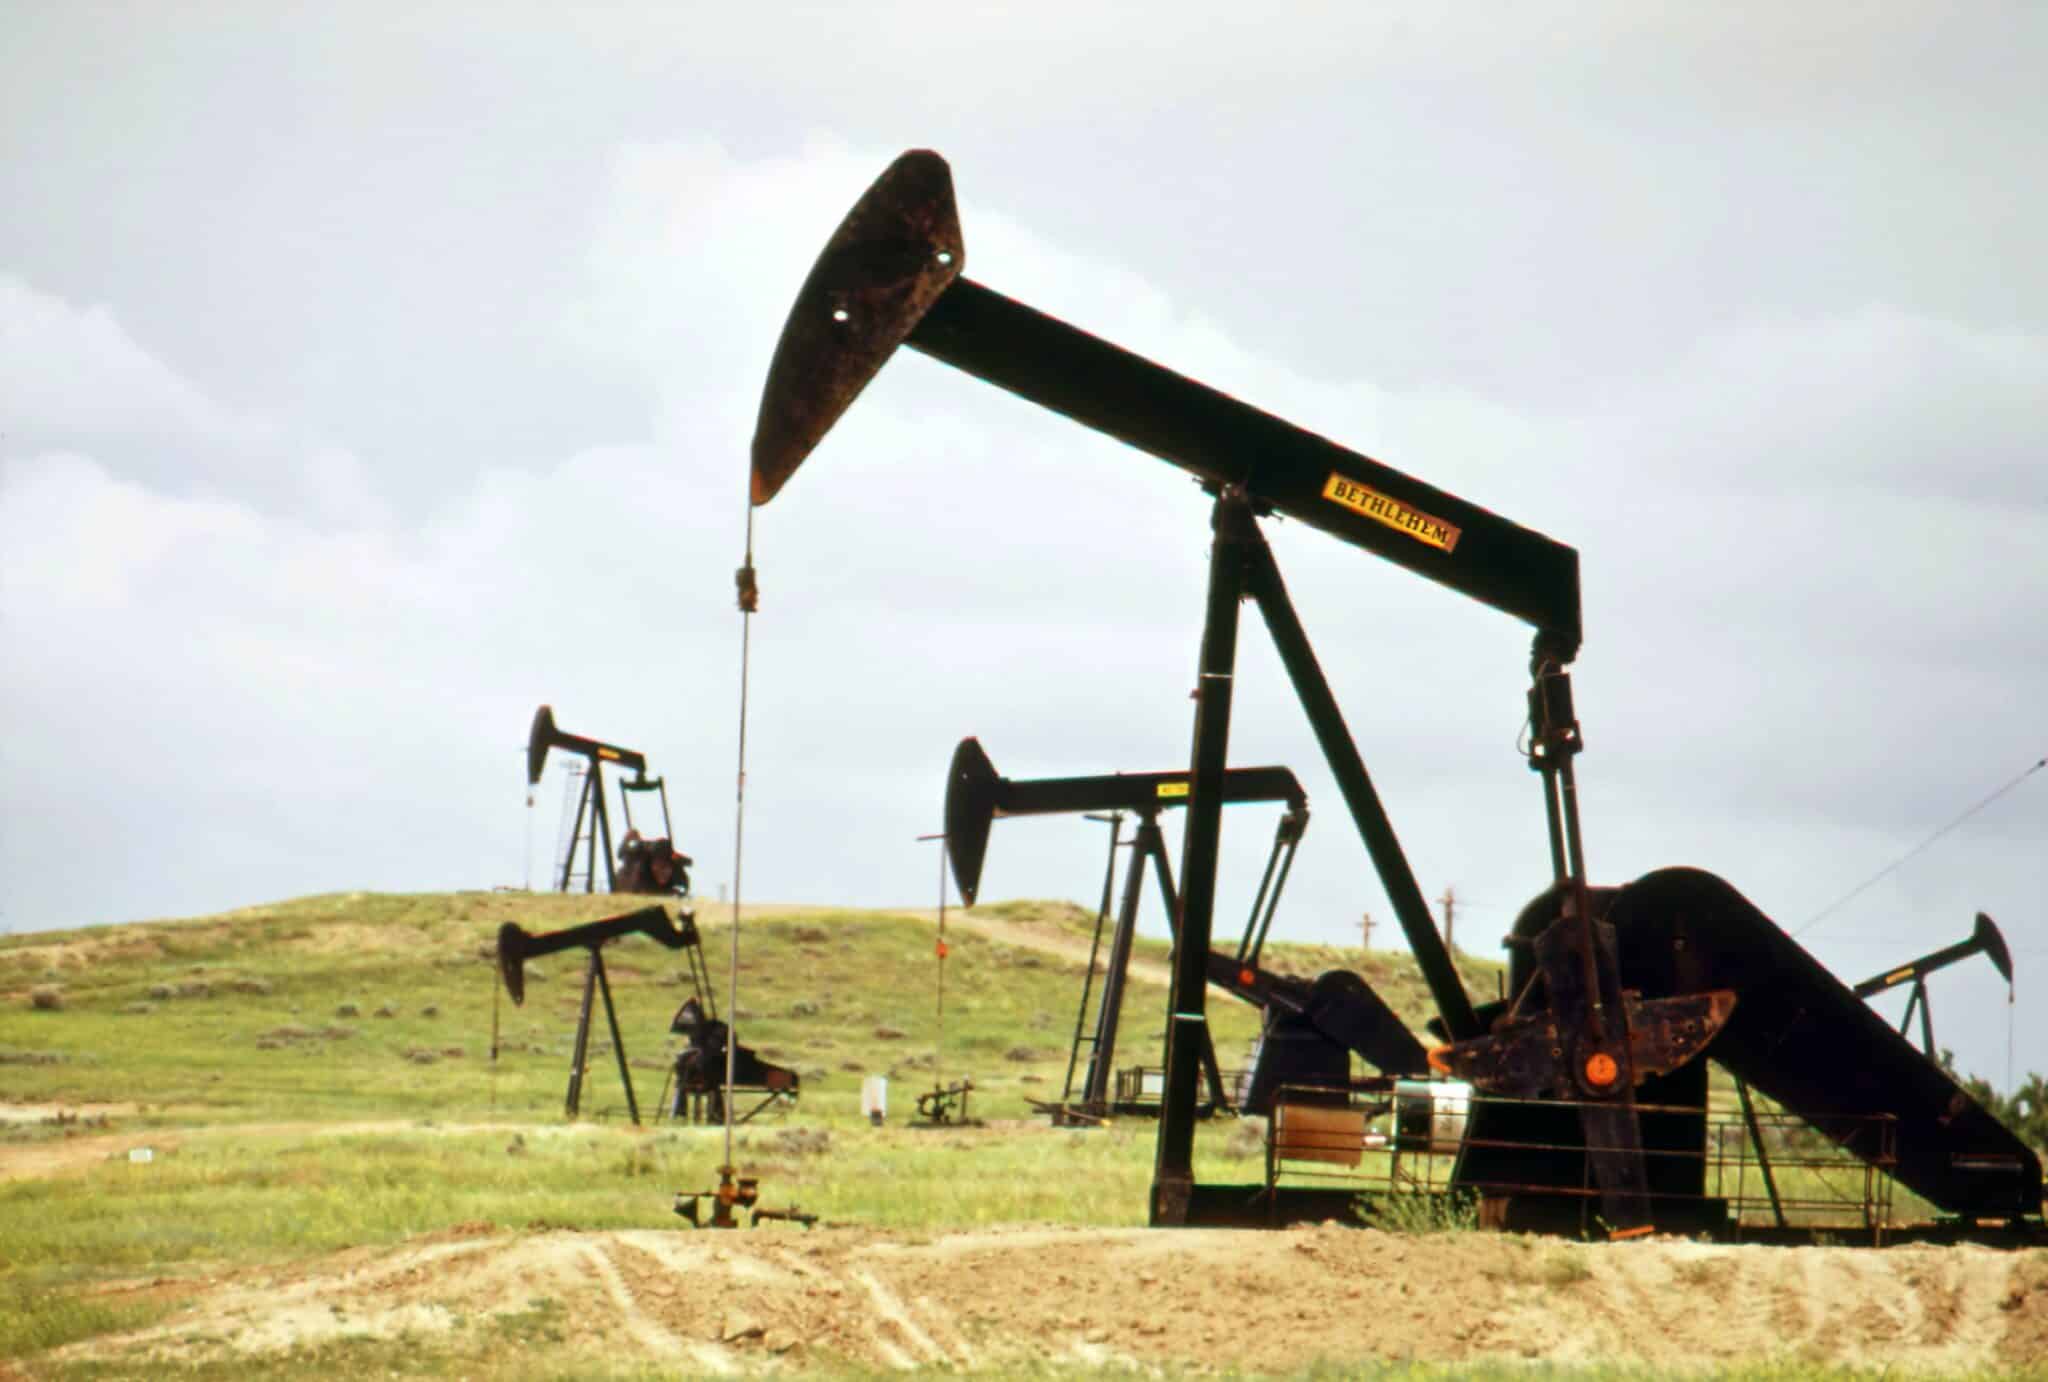 Stock image of a pumpjack in Wyoming